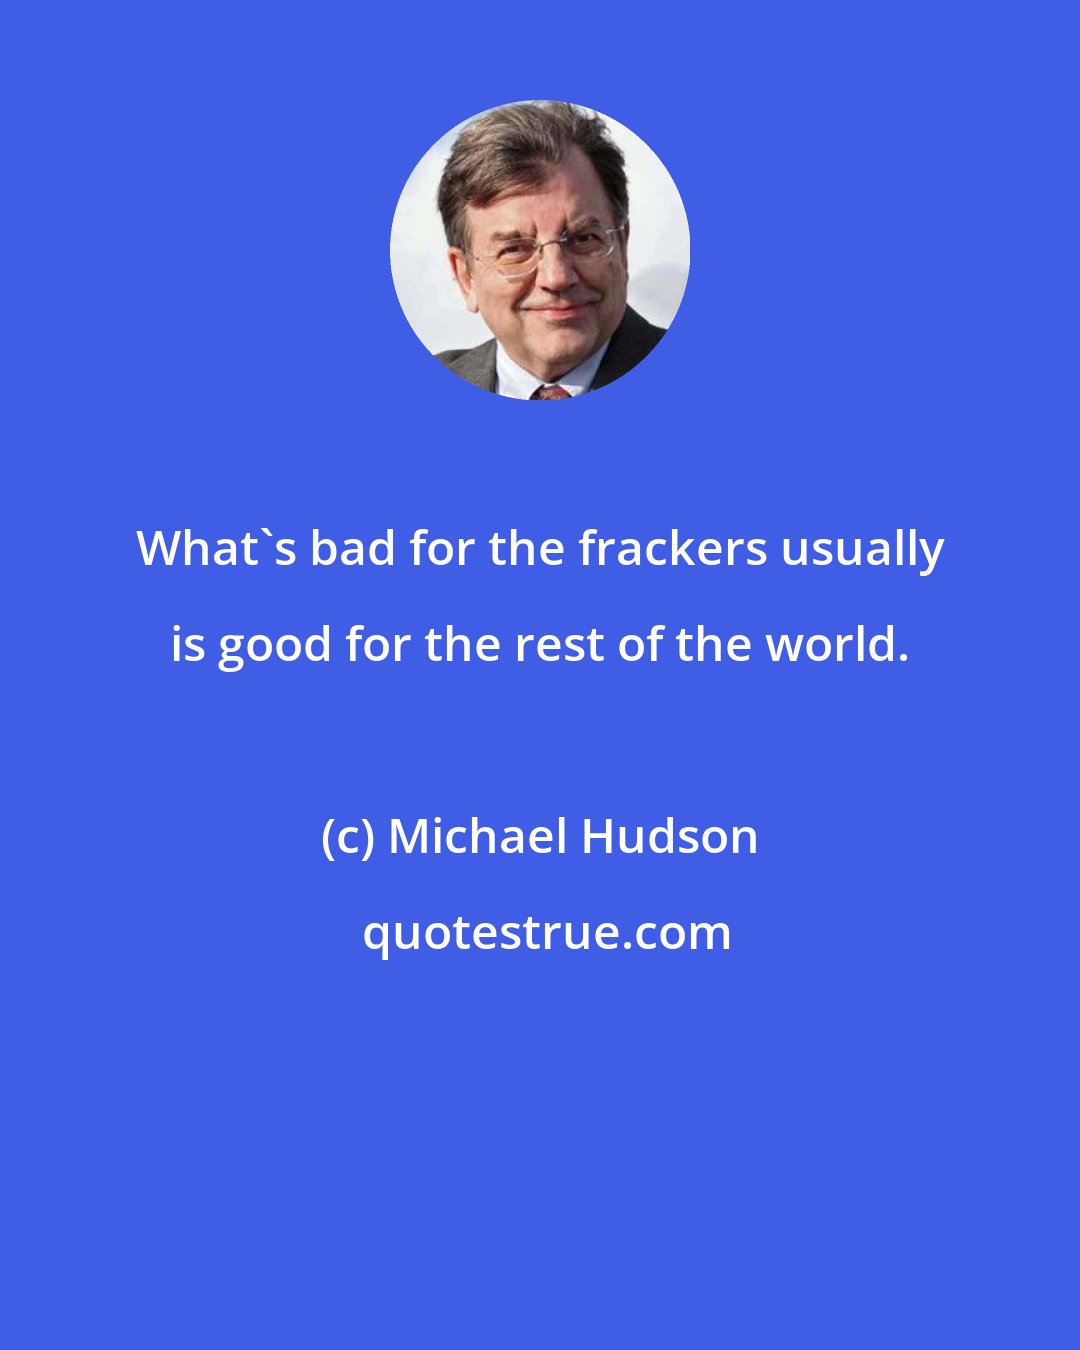 Michael Hudson: What's bad for the frackers usually is good for the rest of the world.